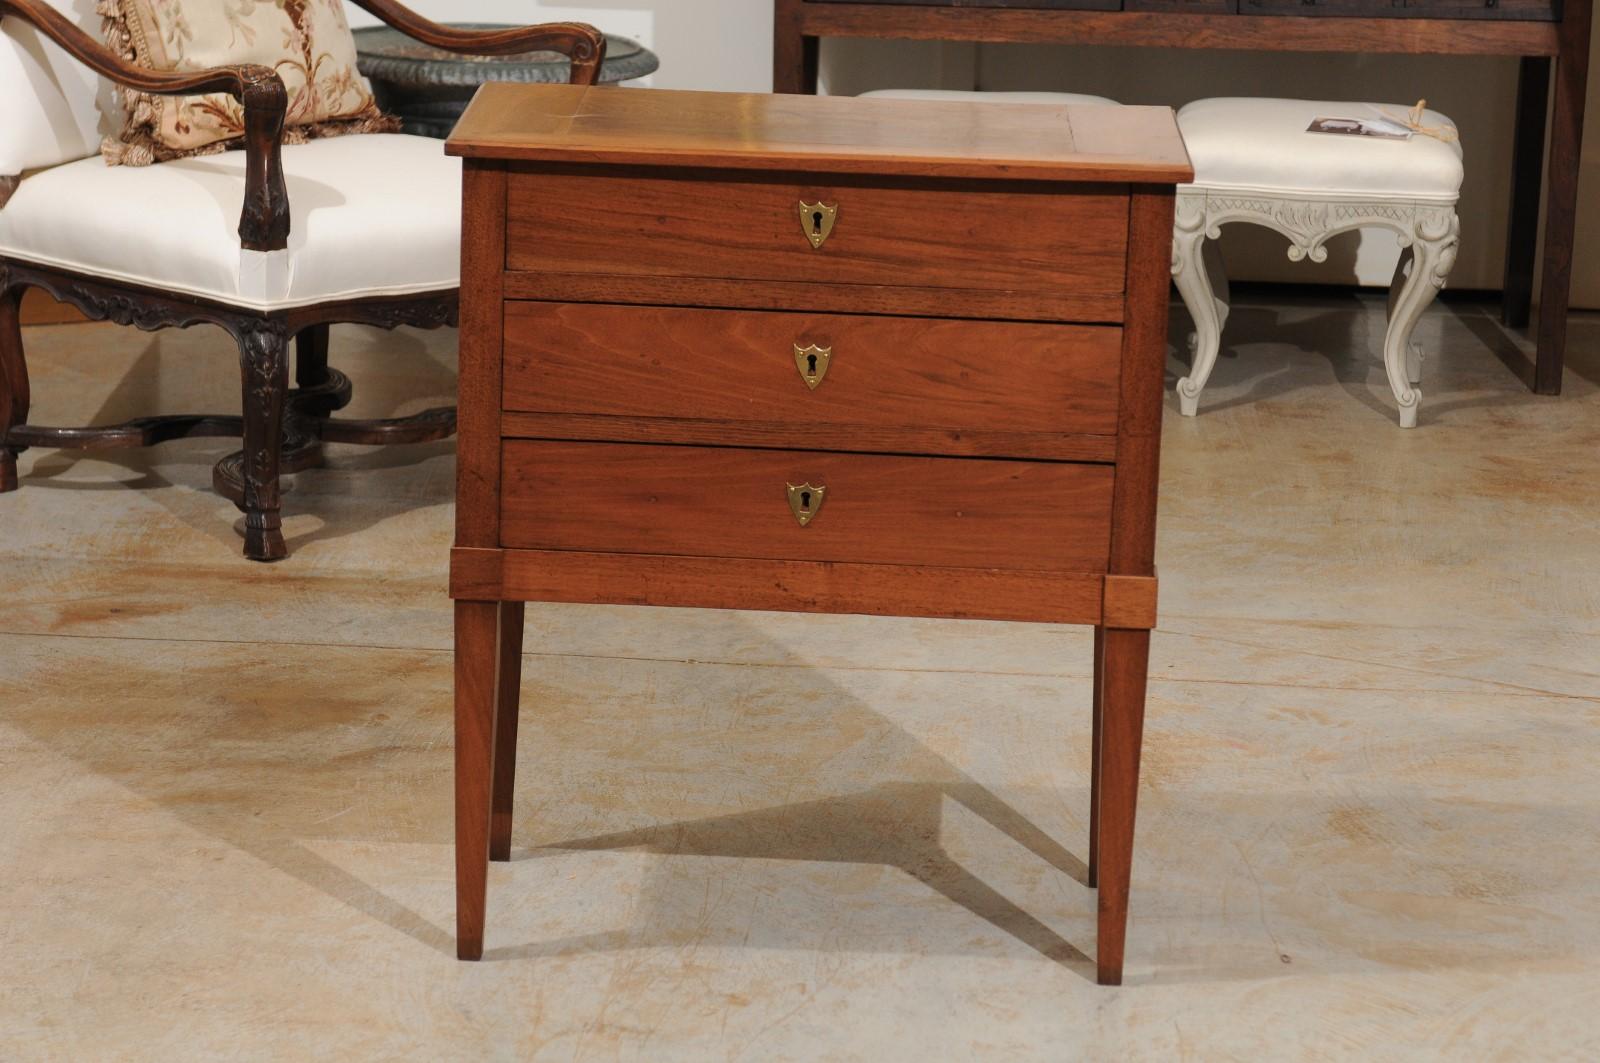 A French Directoire style petite walnut three-drawer commode from the late 19th century with tapered legs. Born in the later years of the eventful 19th century, this petite French commode features a rectangular solid walnut top, sitting above three